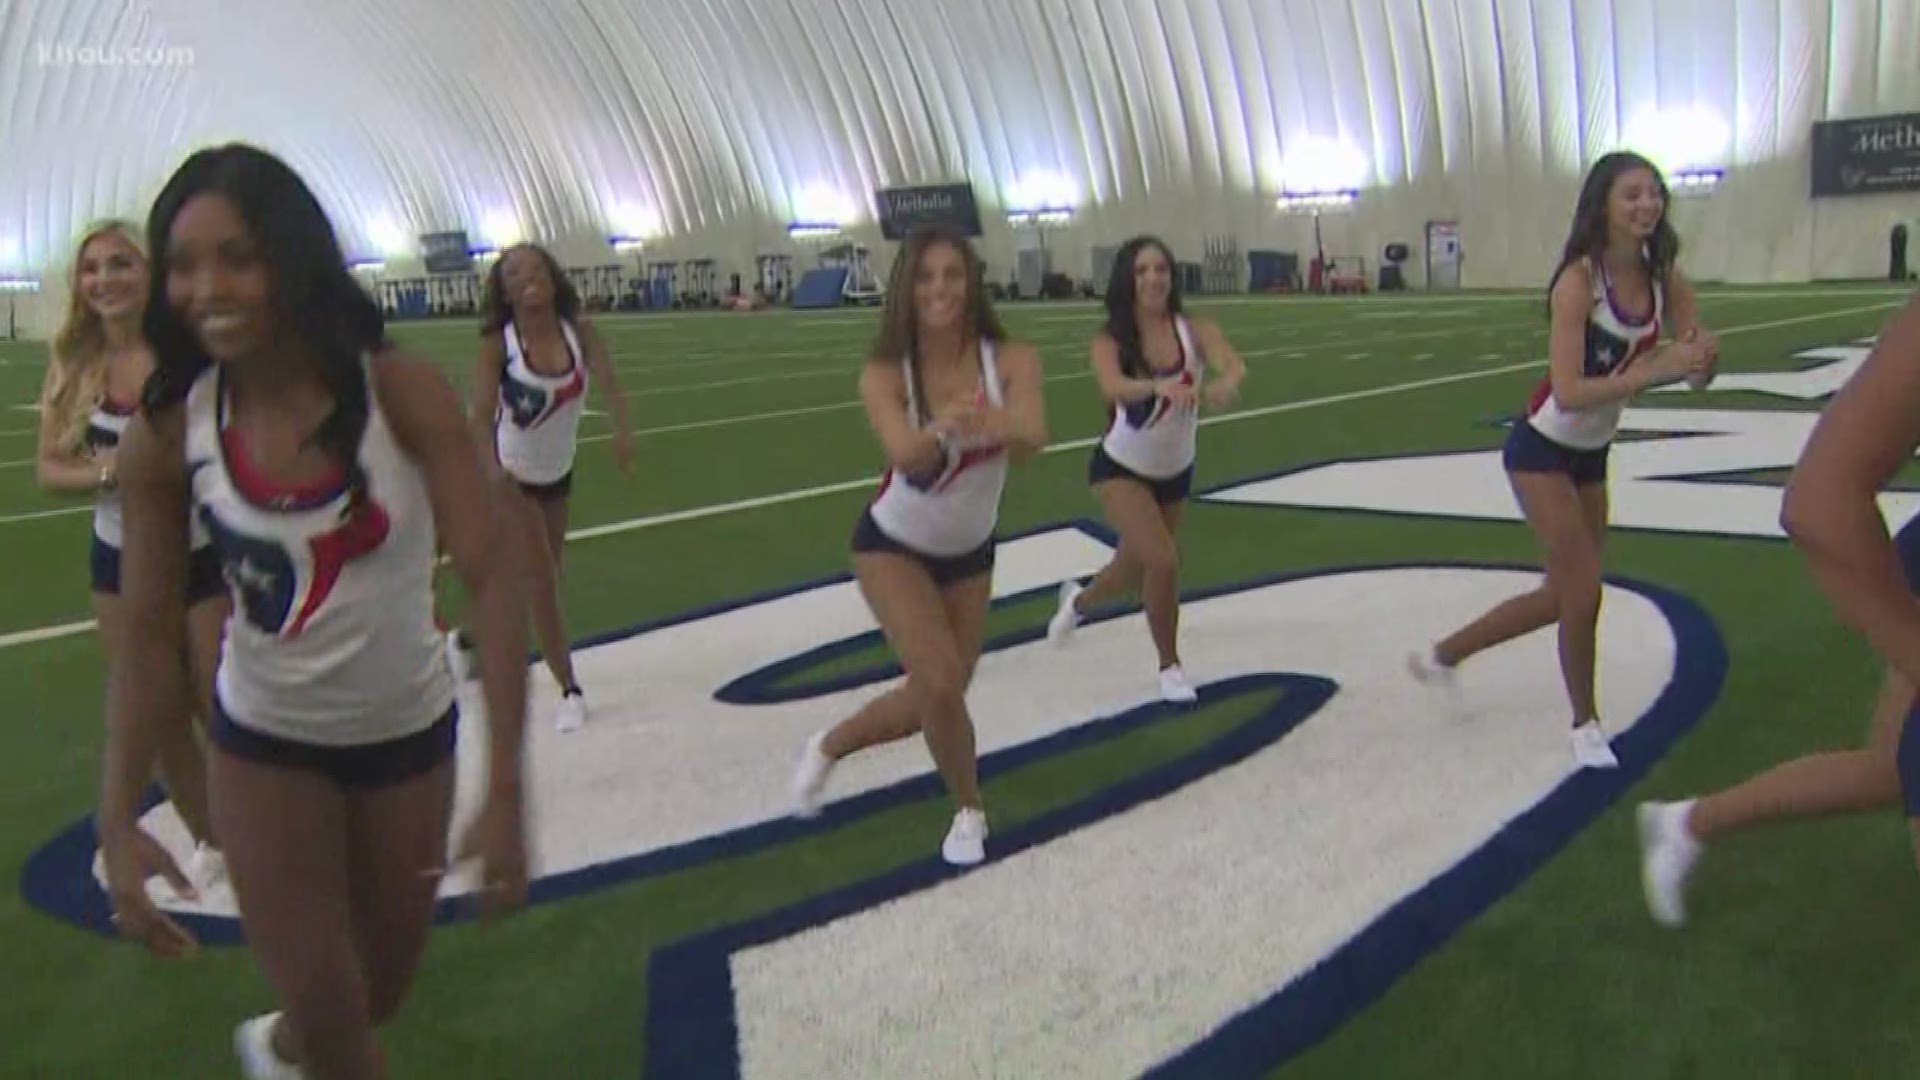 Looking for some inspiration for your summer workout goals? Look no further than the Texans Cheerleaders! The team is sharing some of their workout tips this morning. Our Ruben Galvan was live with the team near NRG Stadium.